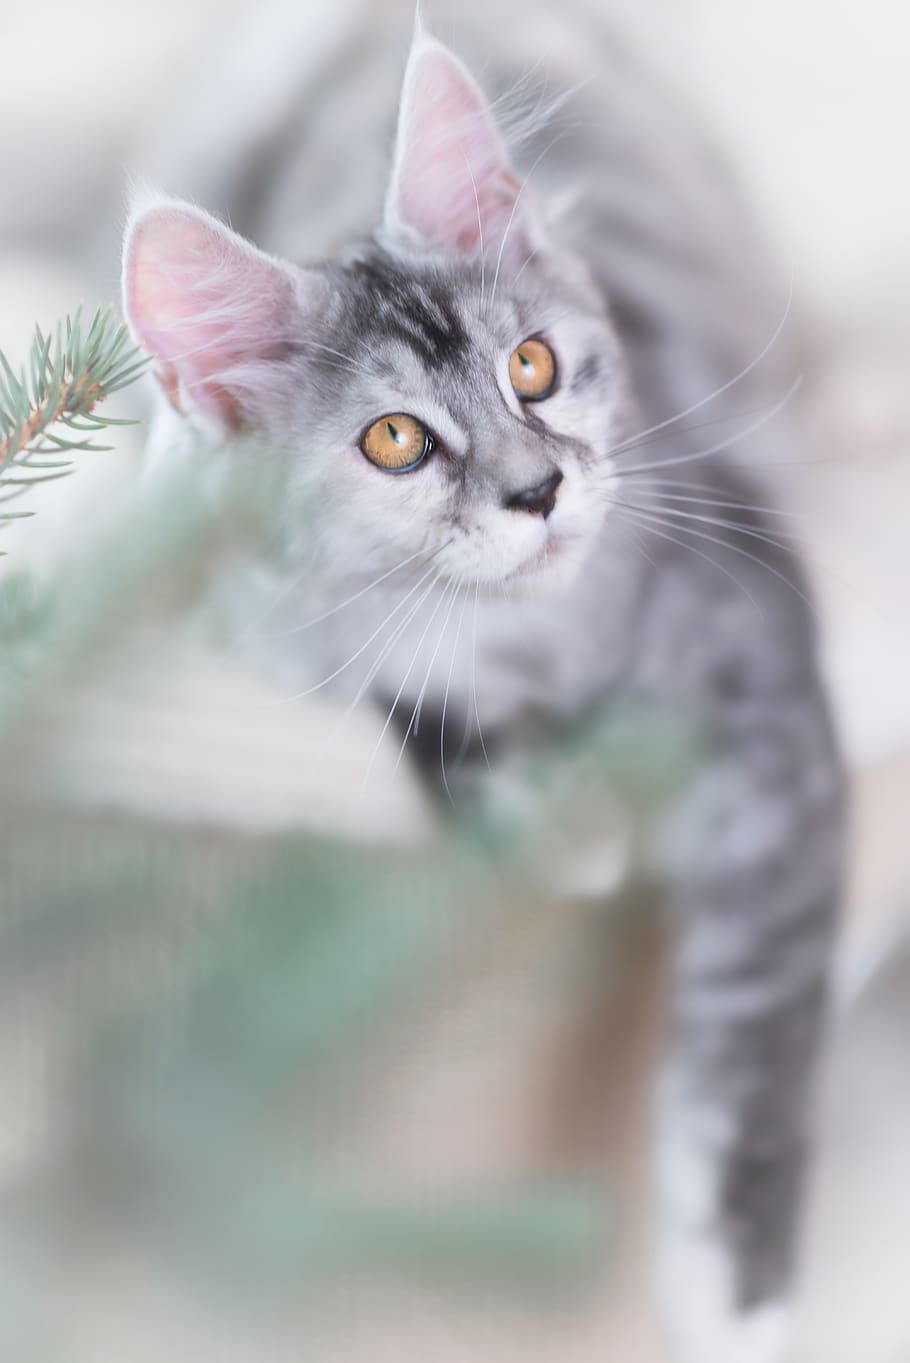 cat, silver, gray, maine coon, kitten, pet, animal, cub, yellow eyes, cat face